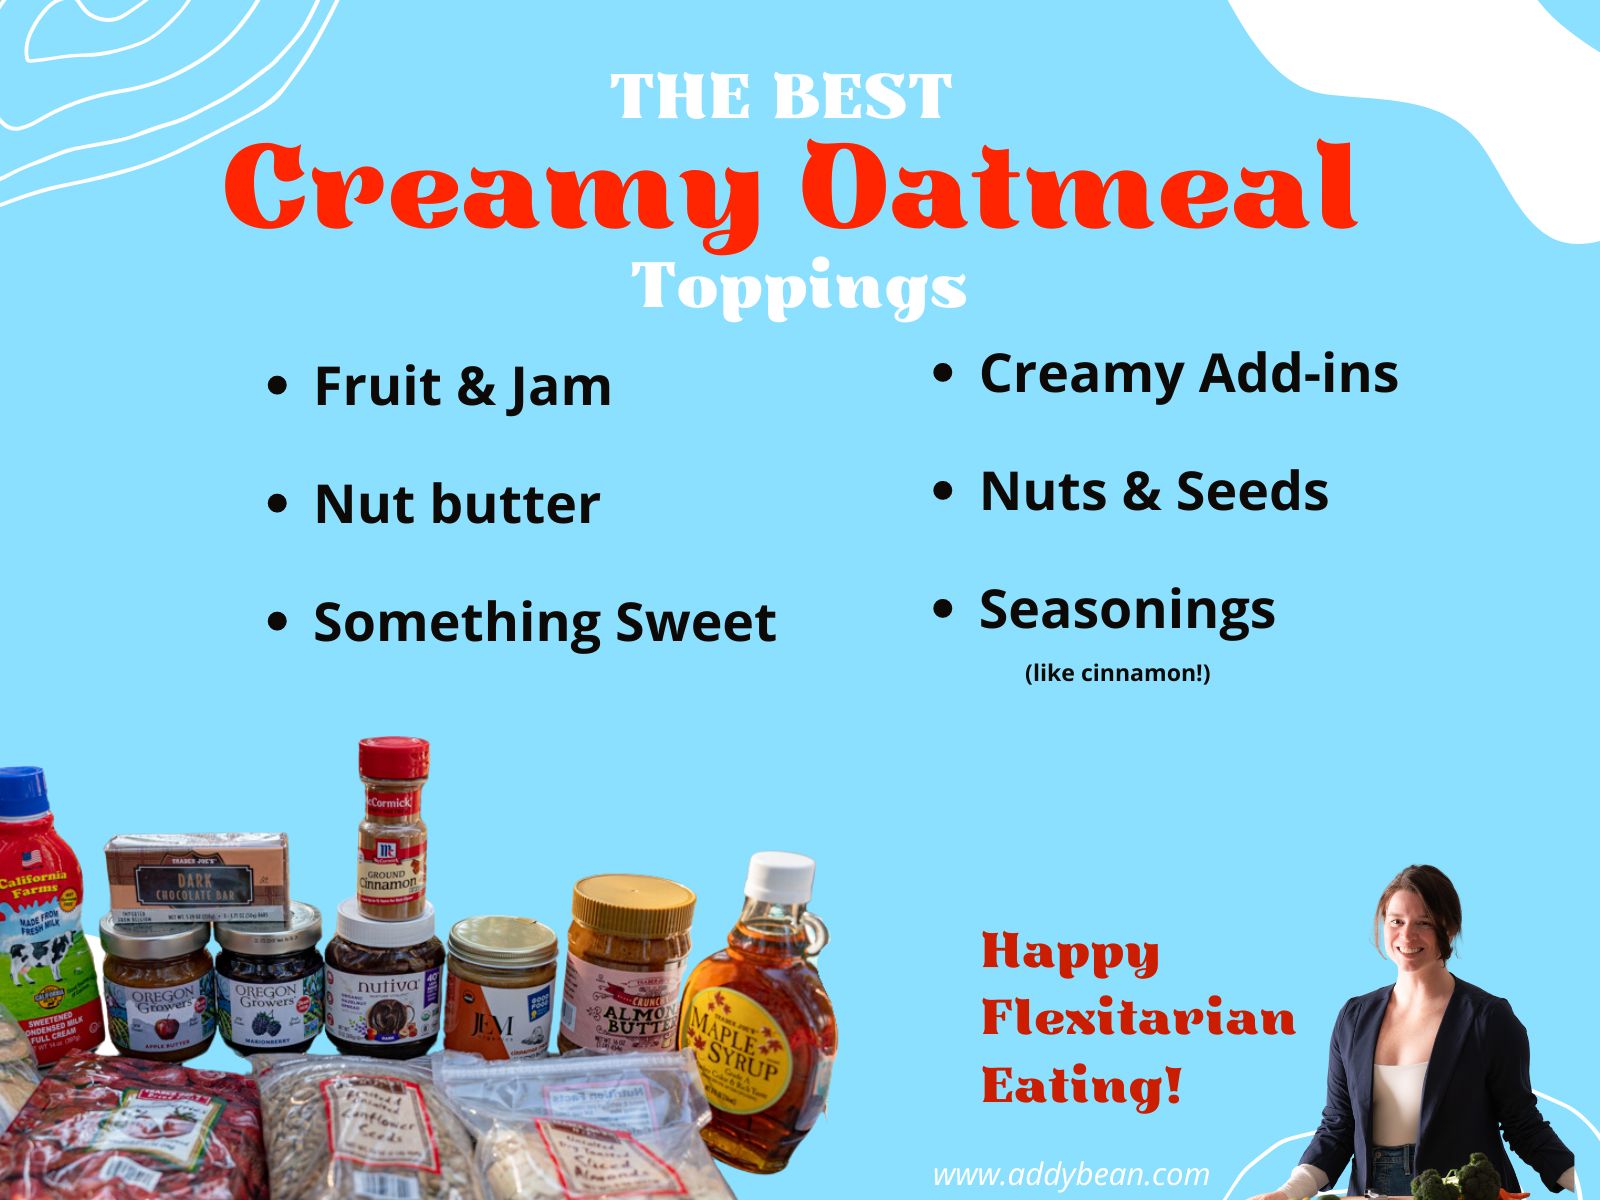 The Best Creamy Oatmeal Toppings Infographic with image of toppings